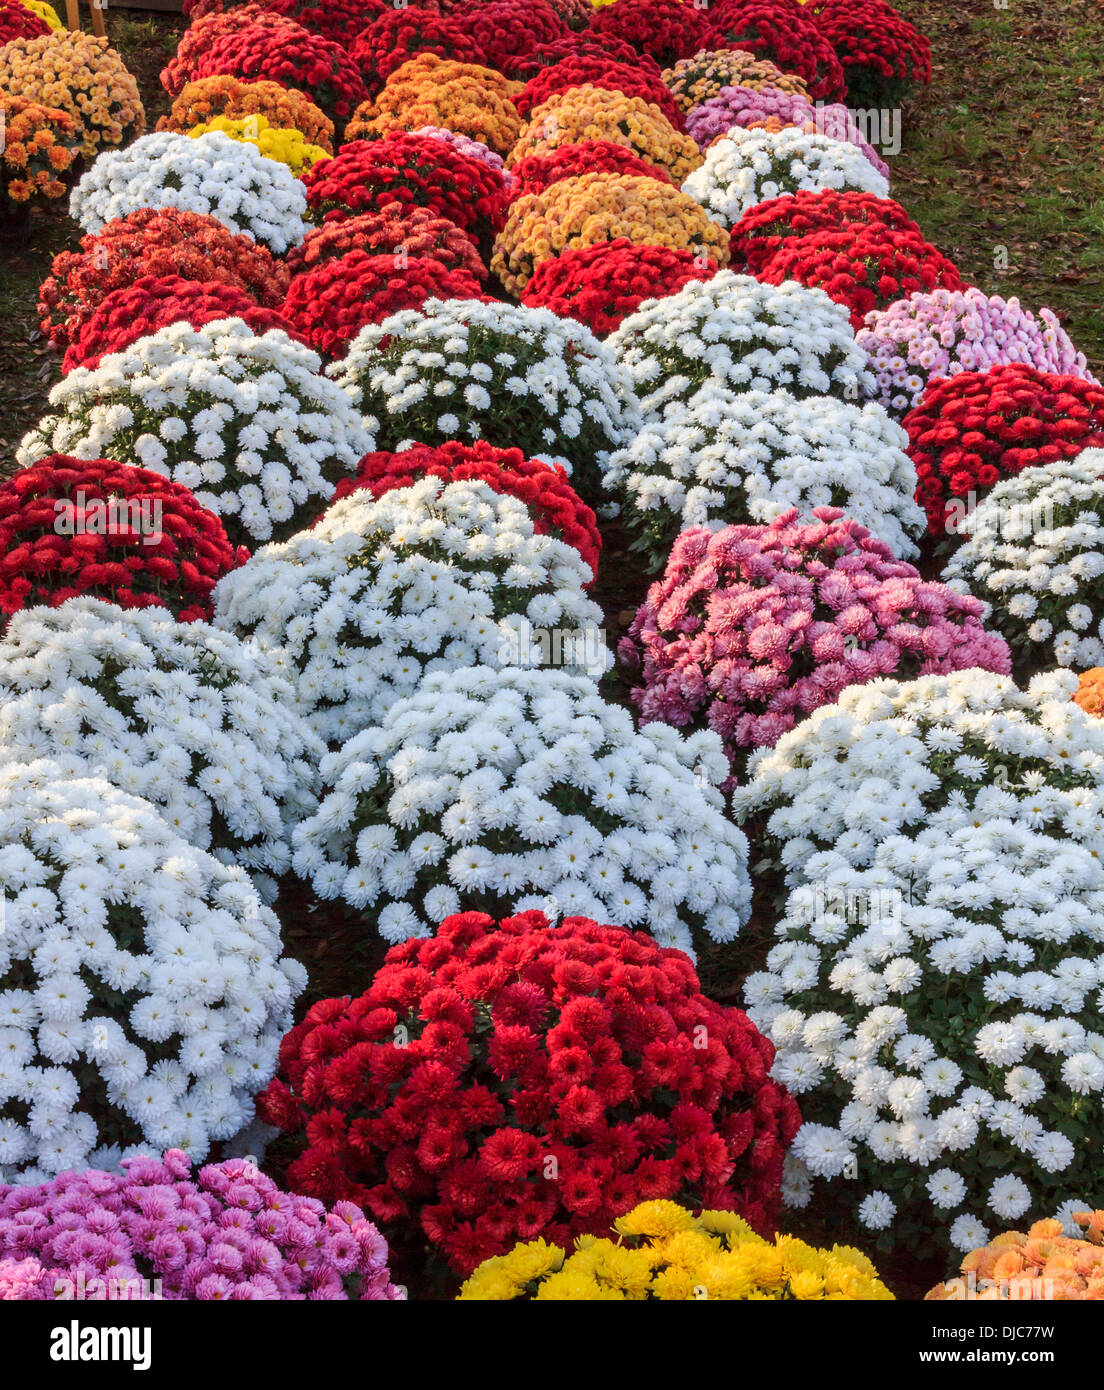 Chrysanthemums of various colors, standing close to each other in pots. Stock Photo